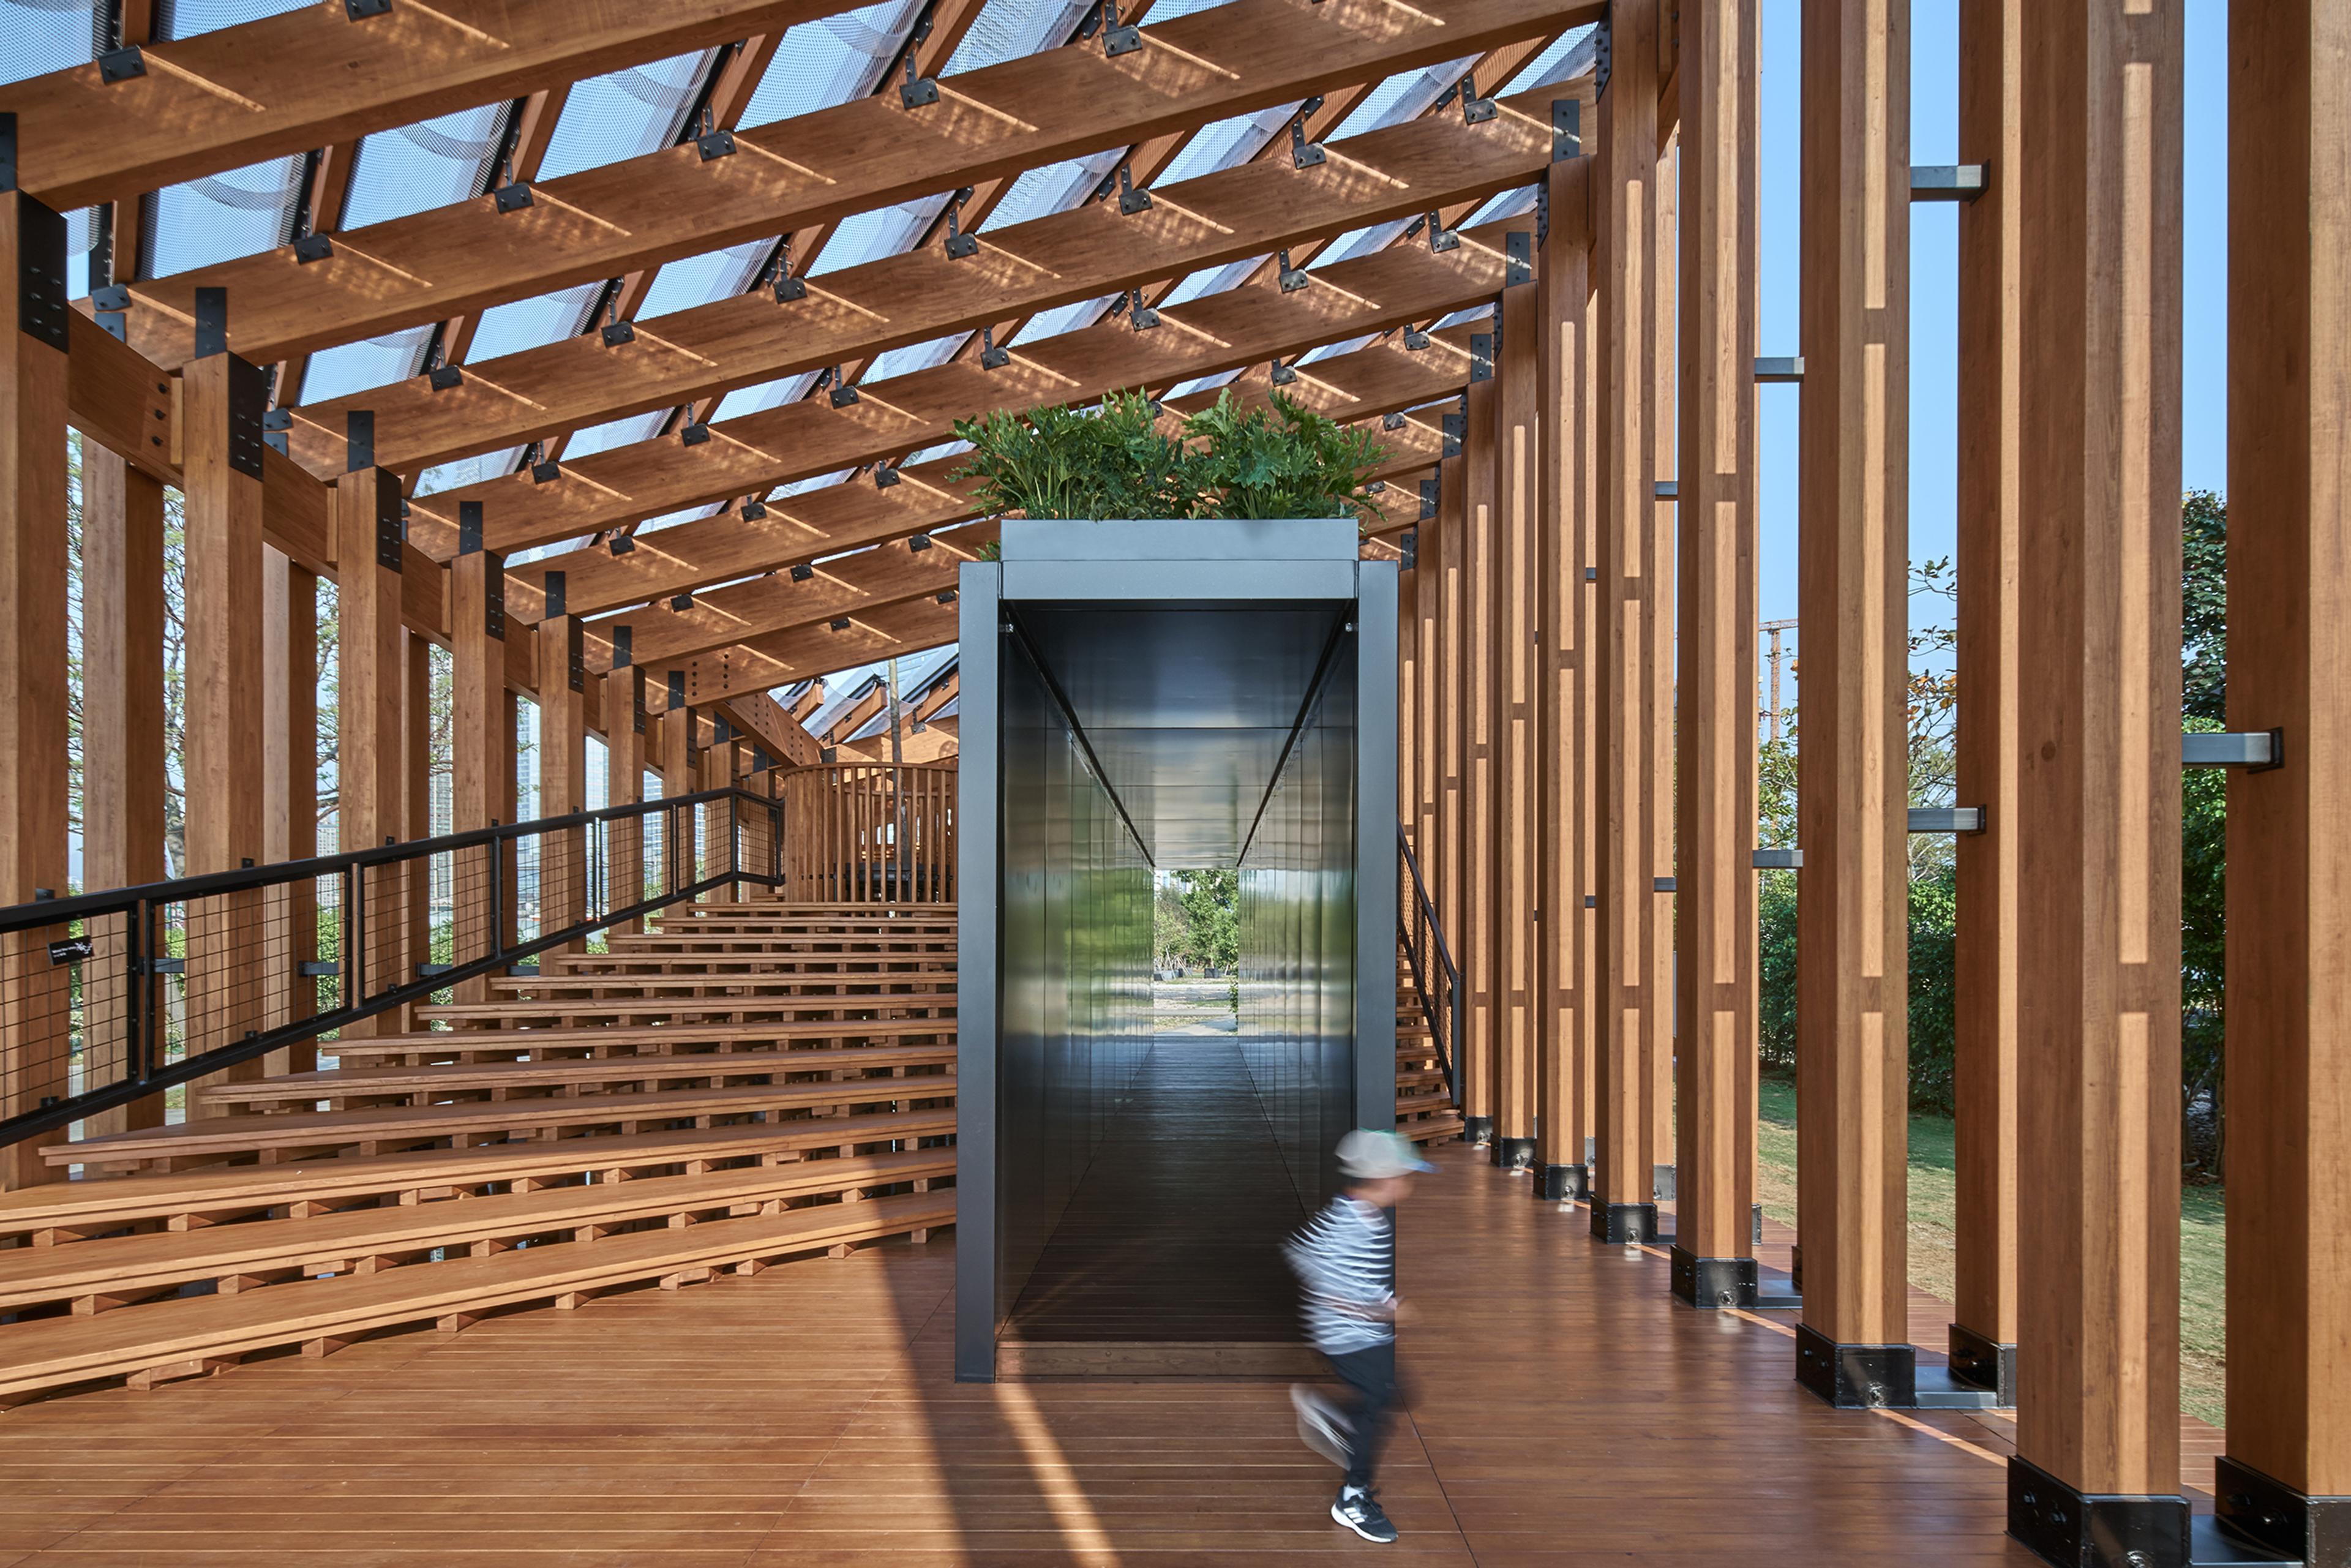 Inside view of Pavilion roof structure in daylight with child playing